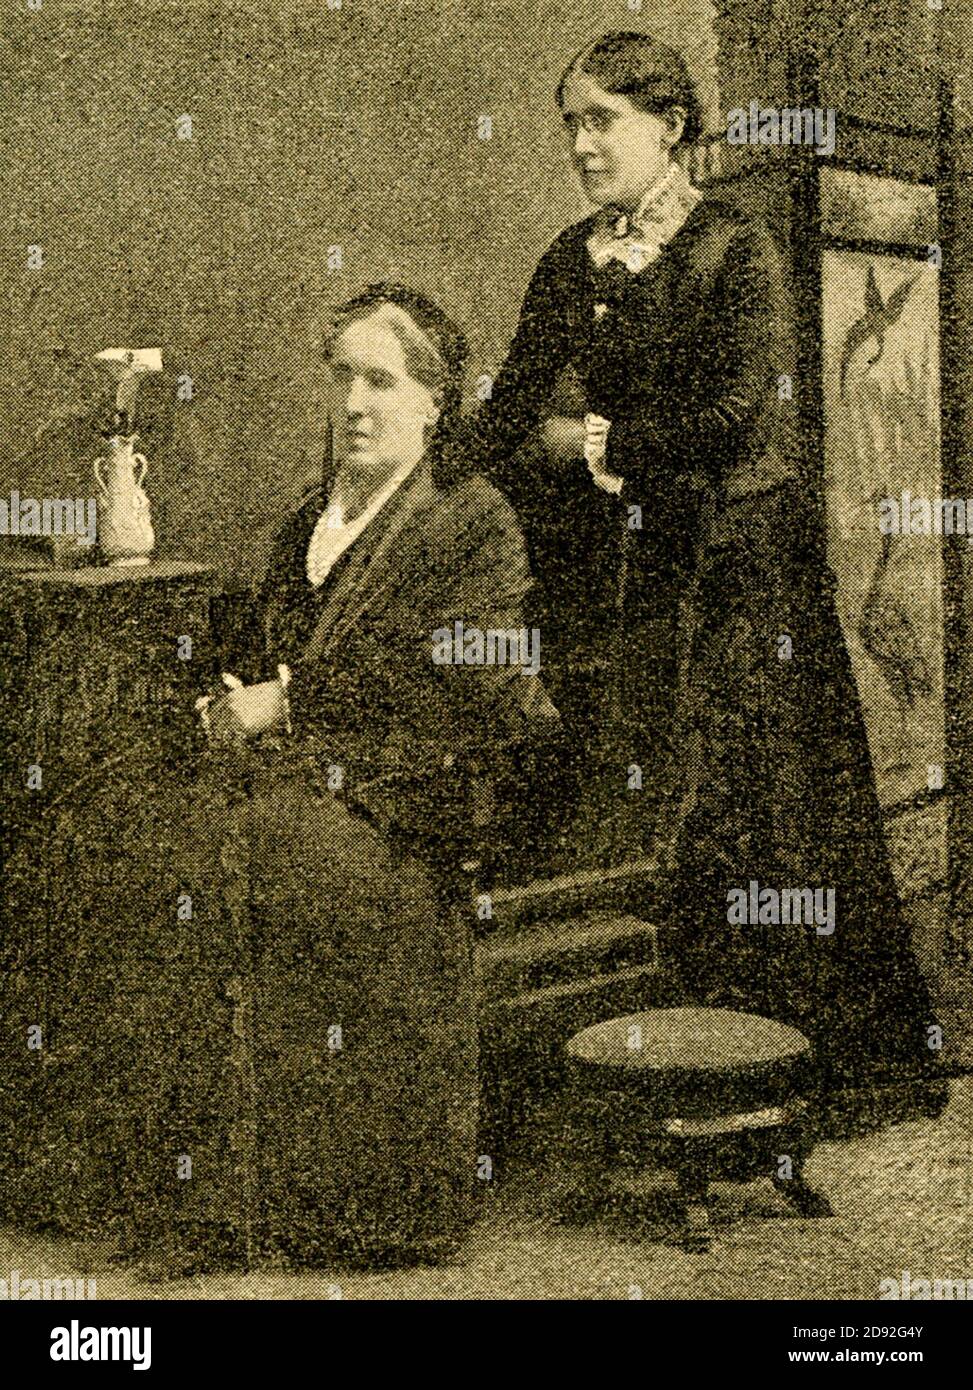 Frances Willard and Her Mother (“Saint Courageous”) - so reads the 1898 caption. Willard referred to her mother as “Saint Courageous.” Frances Elizabeth Caroline Willard (1839 –1898) was an American educator, temperance reformer, and women's suffragist. Willard became the national president of Woman's Christian Temperance Union (WCTU) in 1879, and remained president until her death in 1898. Stock Photo